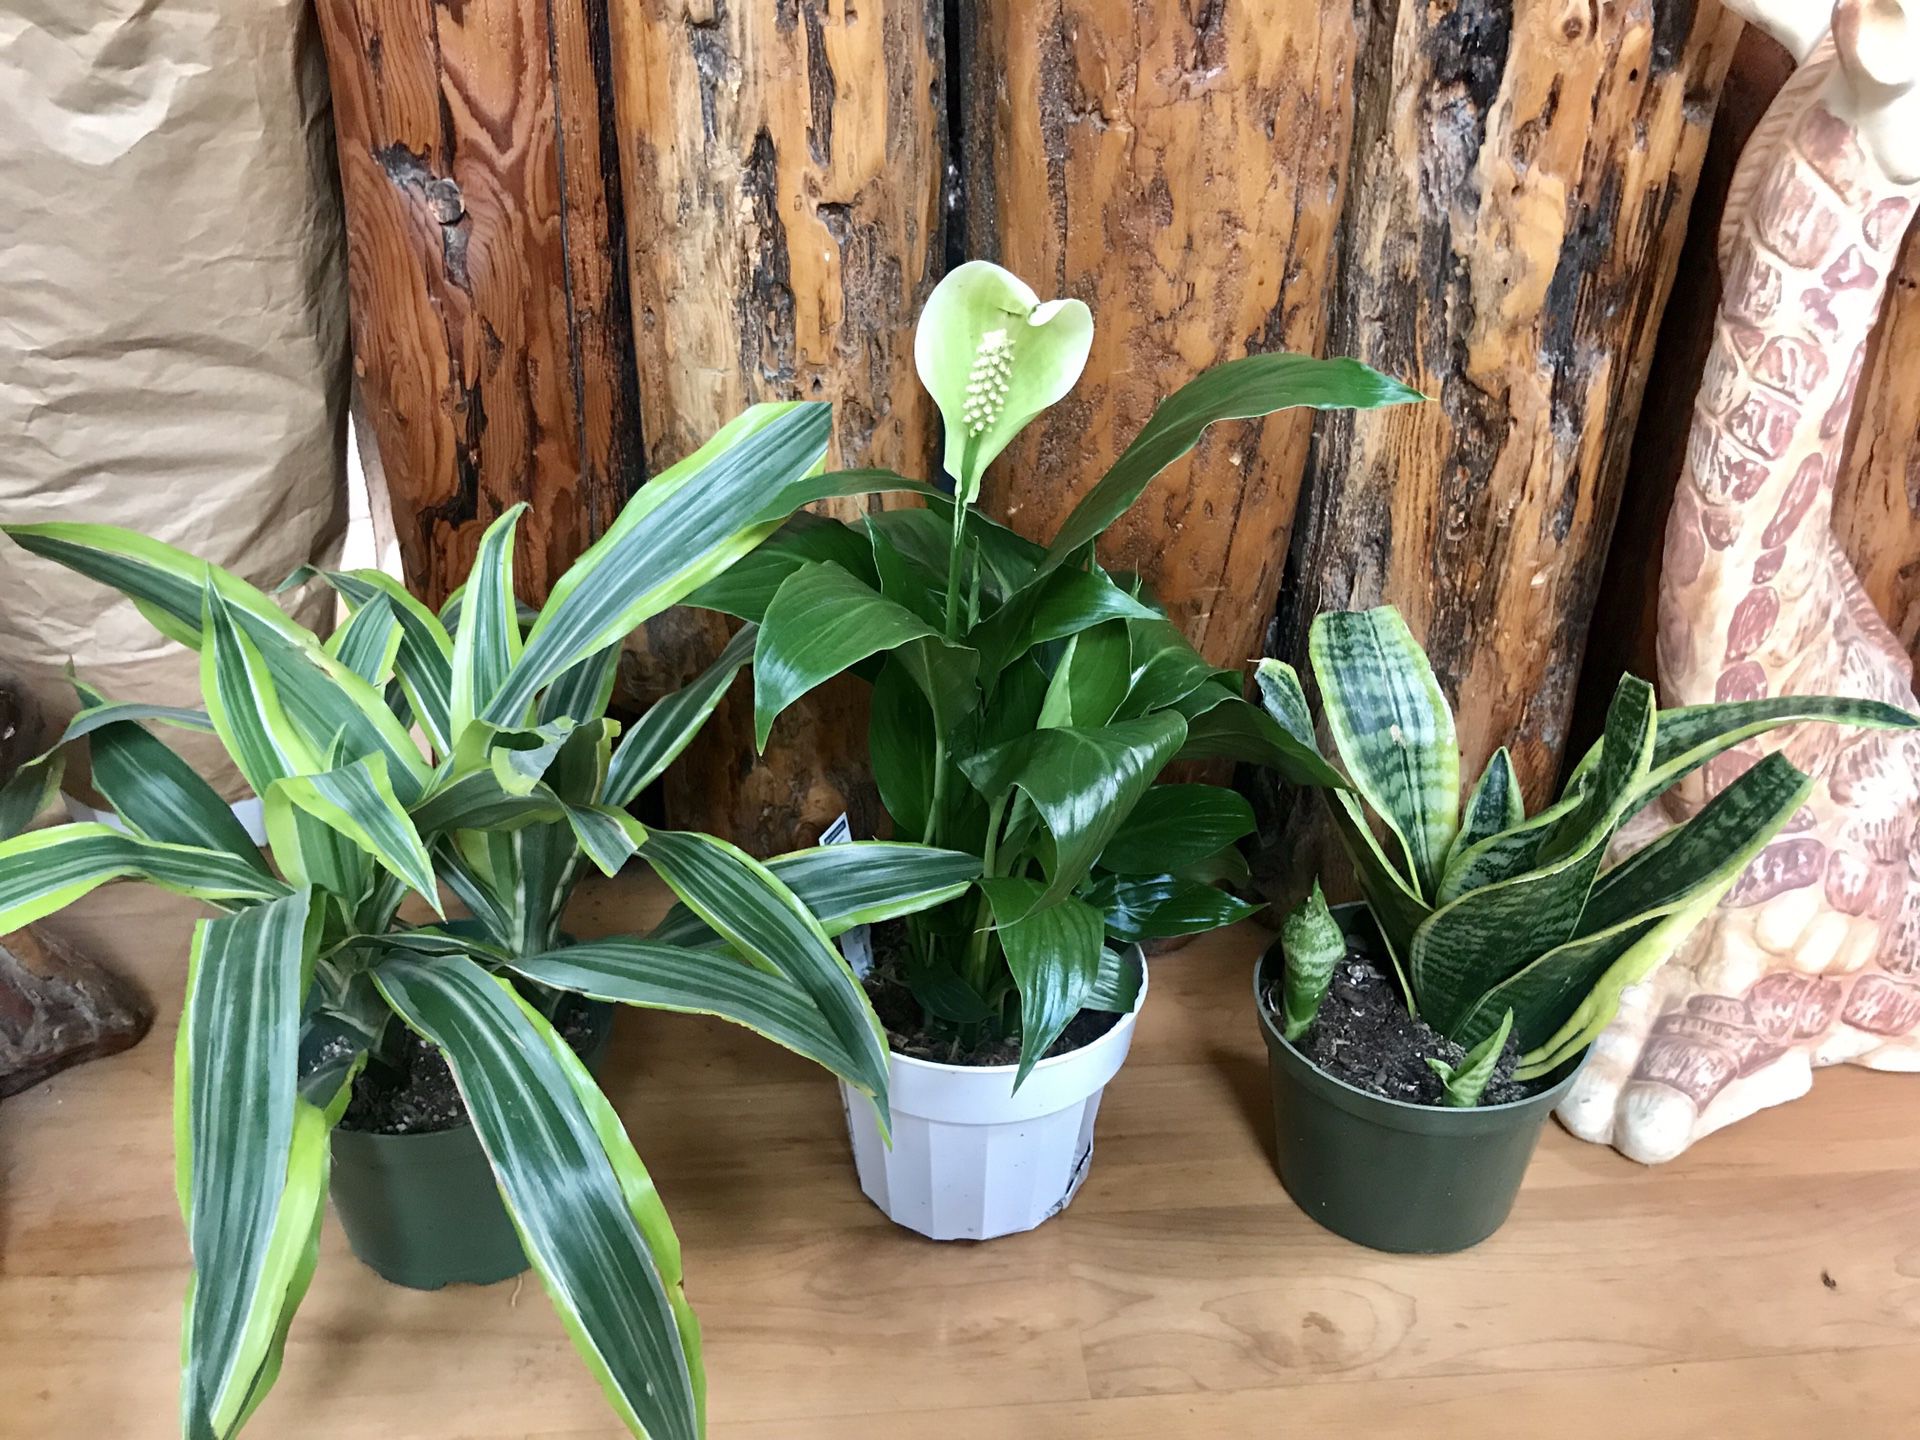 Plants (6” pot, 3 plants for $10) fortune, peace lily and snake plants